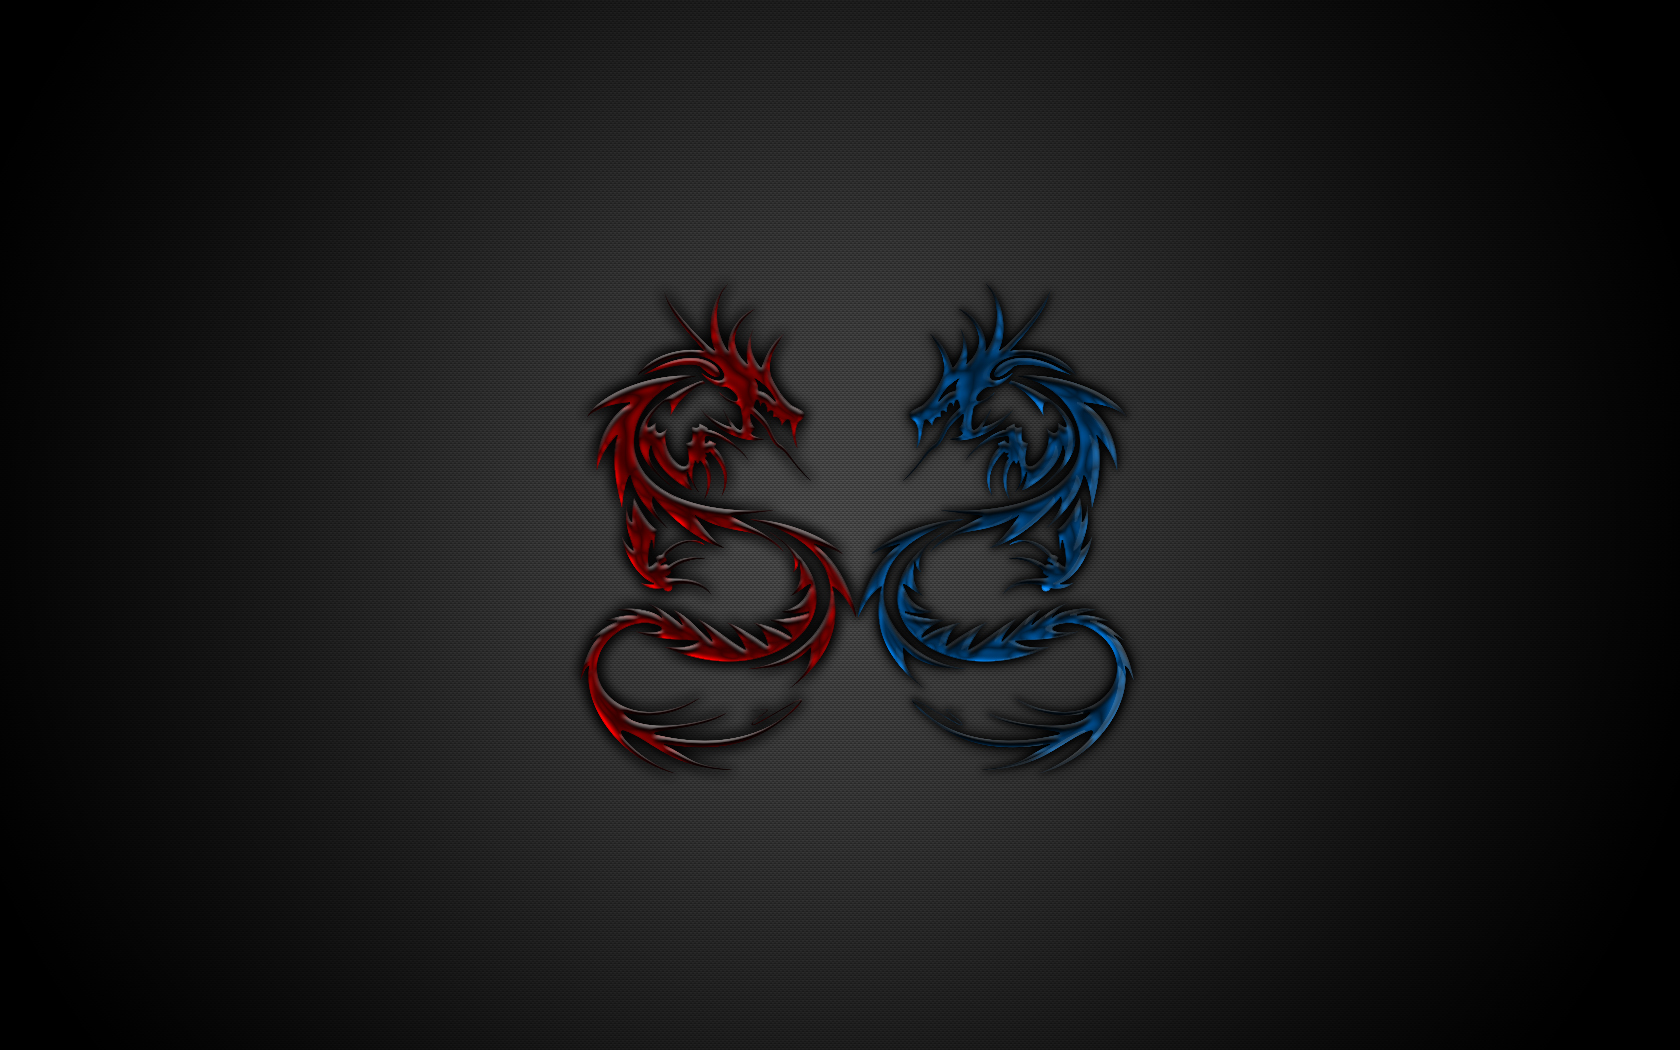 Tribal Dragon Wallpaper By Casp93 Customization Abstract